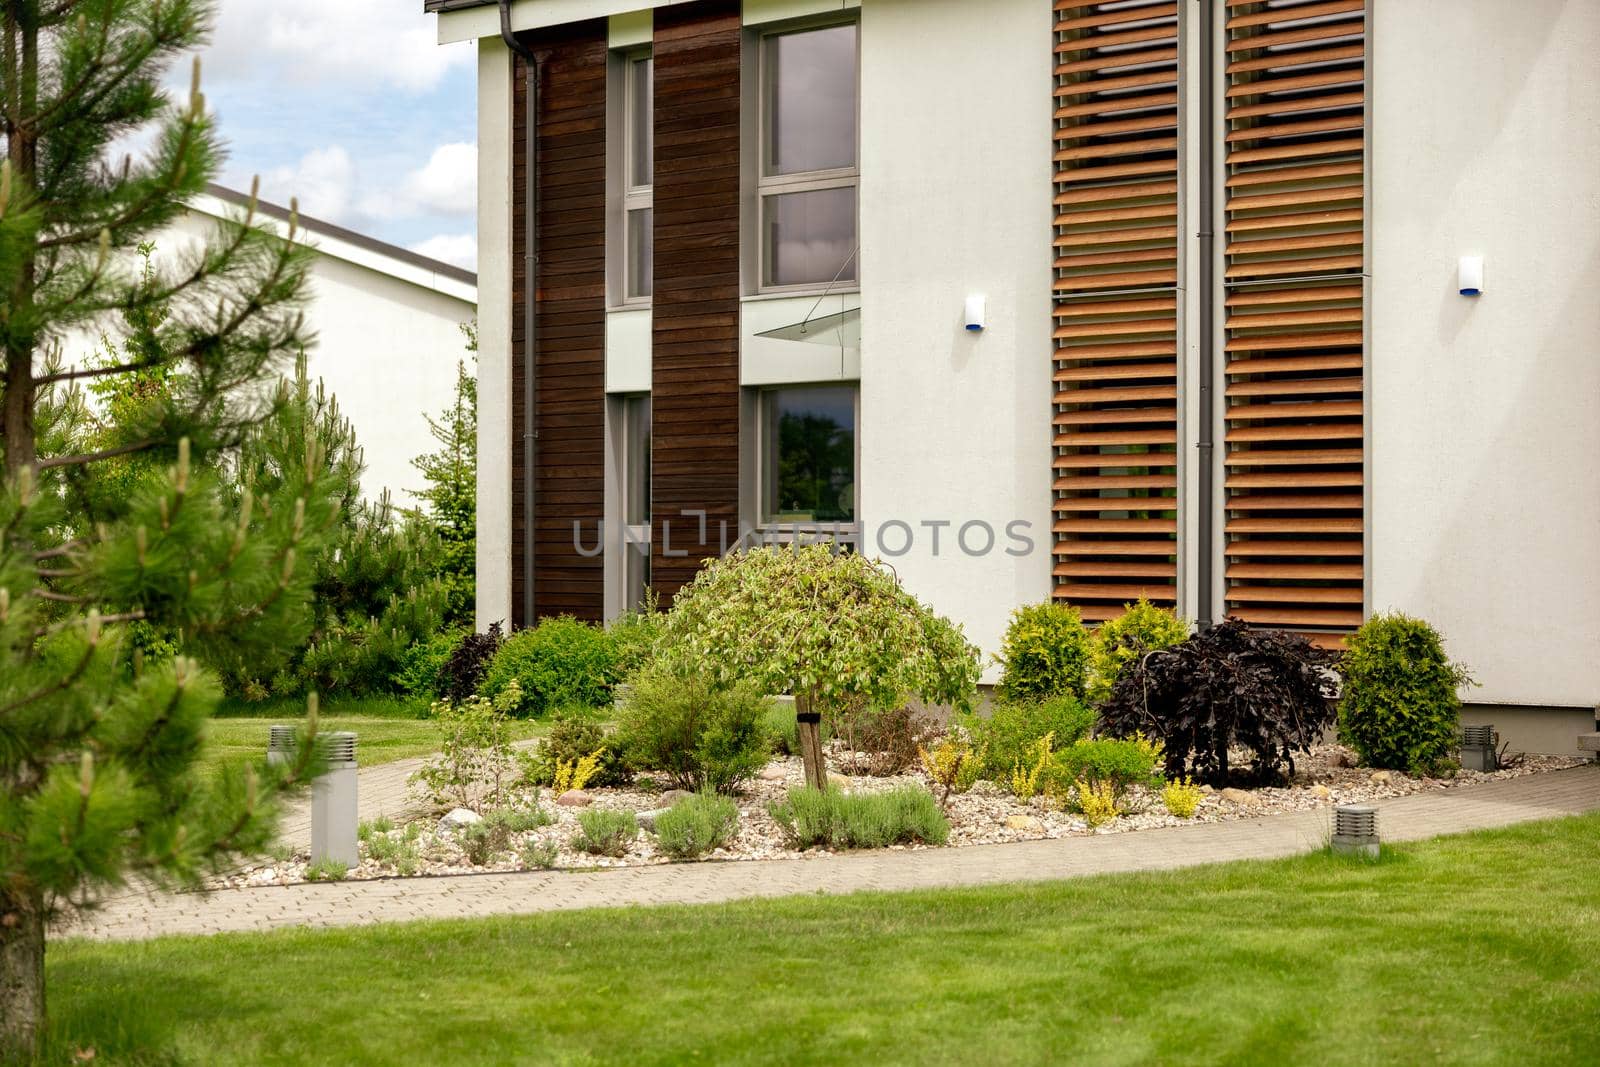 Various plants and stones in front of modern house, front yard. Landscape design. Beautiful garden. Modern urban living residences with private courtyards. Green outdoor facilities, lawn. Garden care